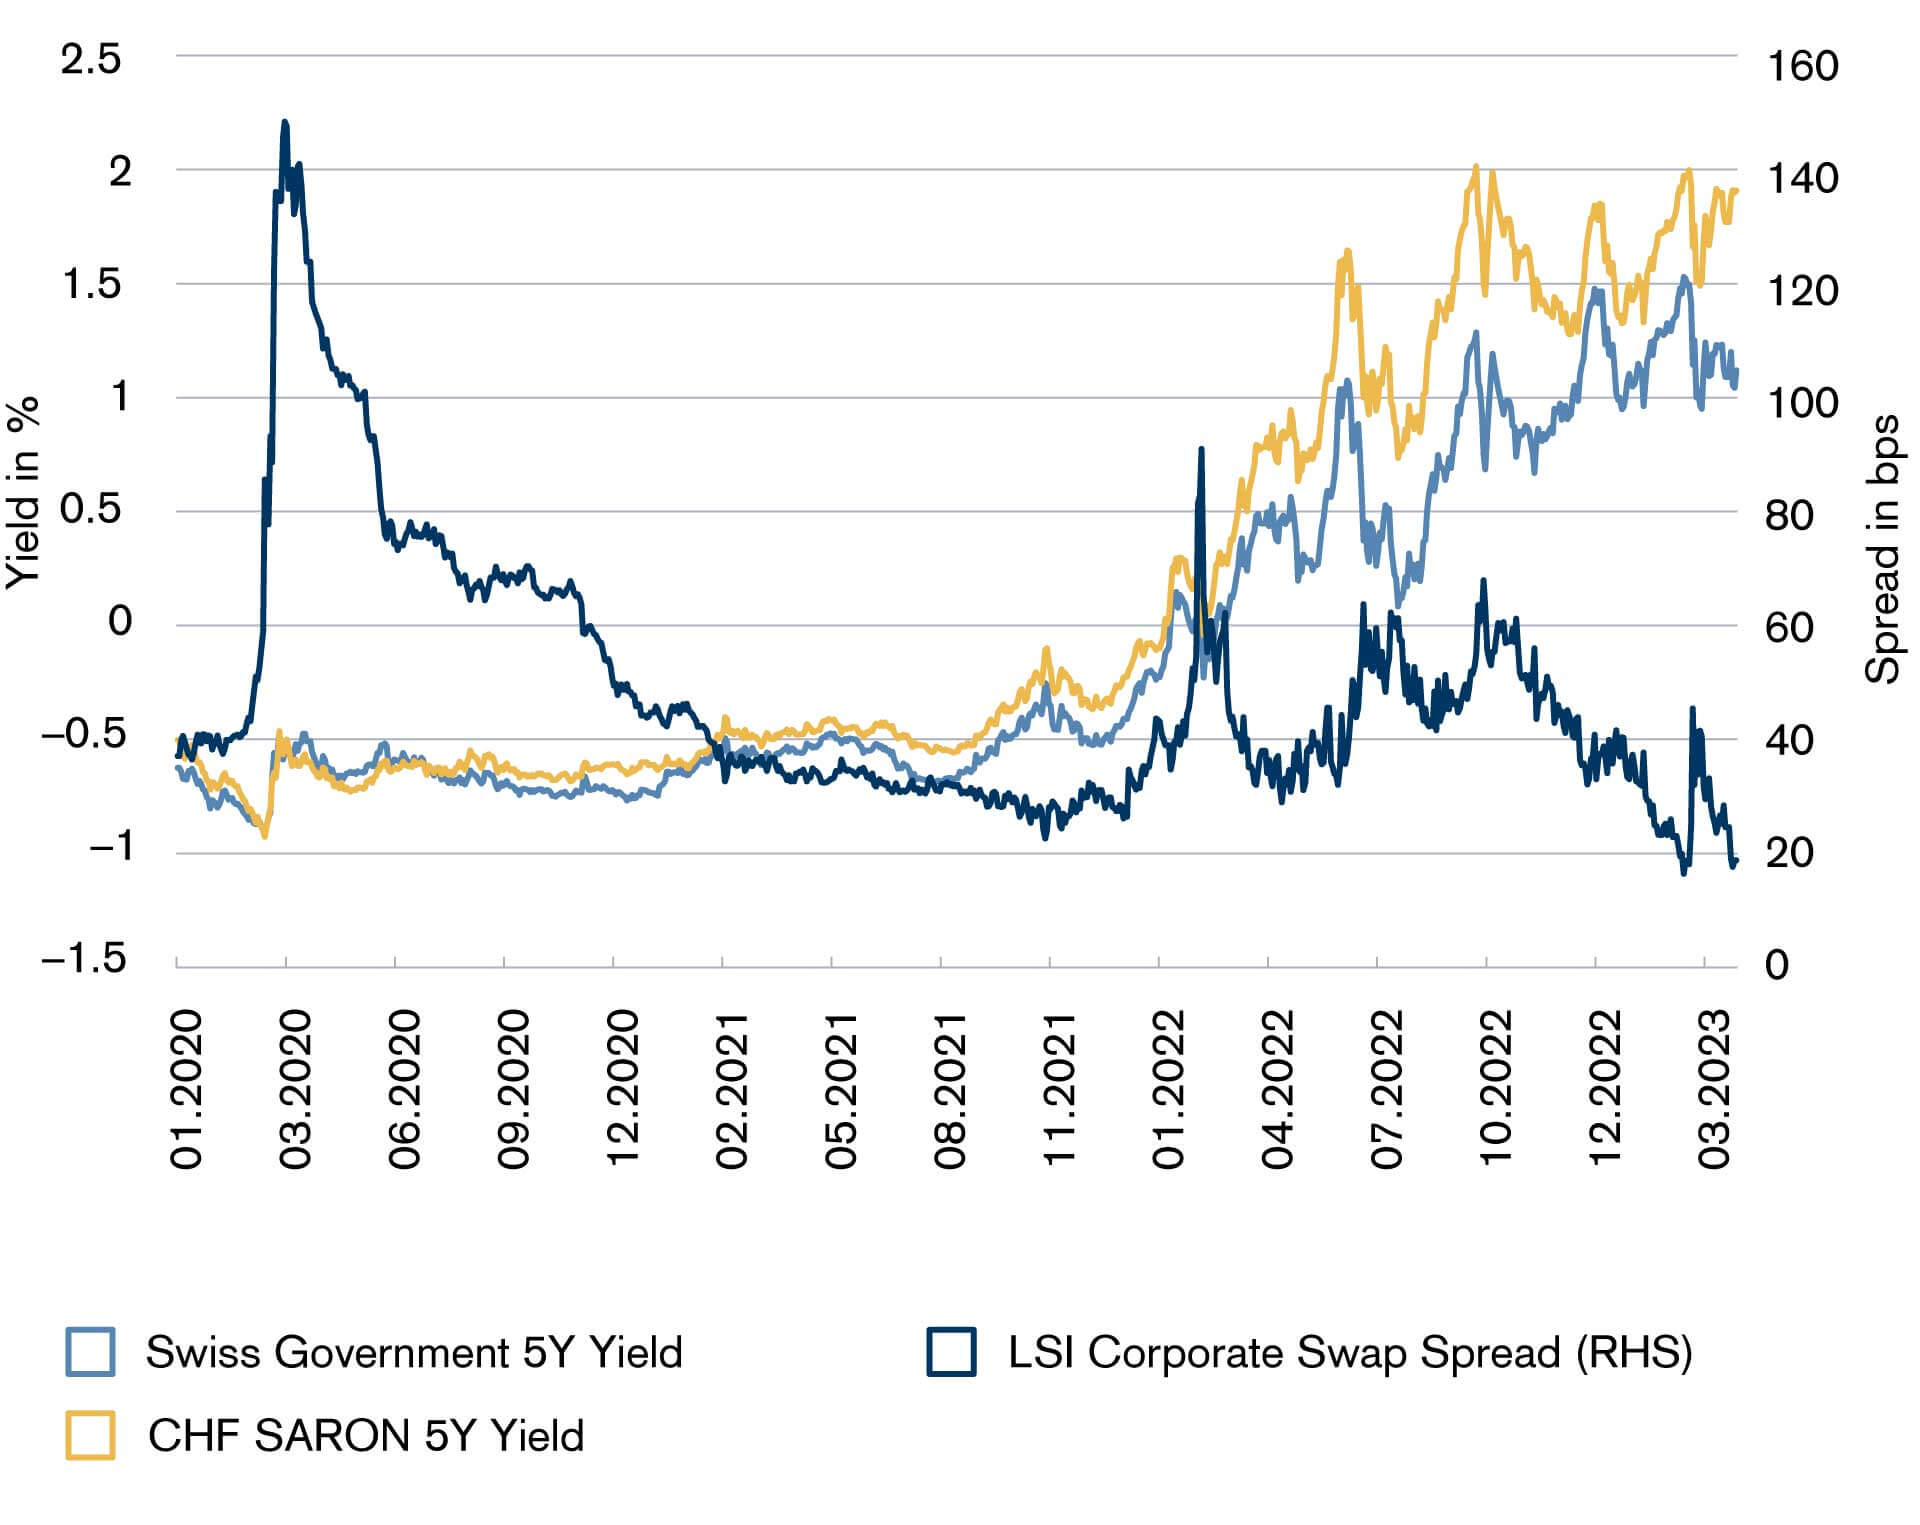 Most CHF bonds, measured by their market share, have traded with a negative yield for many years. Since the beginning of 2022, yields have risen sharply. This rise has been mainly driven by higher real rates while credit spreads (LSI Corporate Swap Spread) remained range-bound between 40 bps and 70 bps throughout 2022.